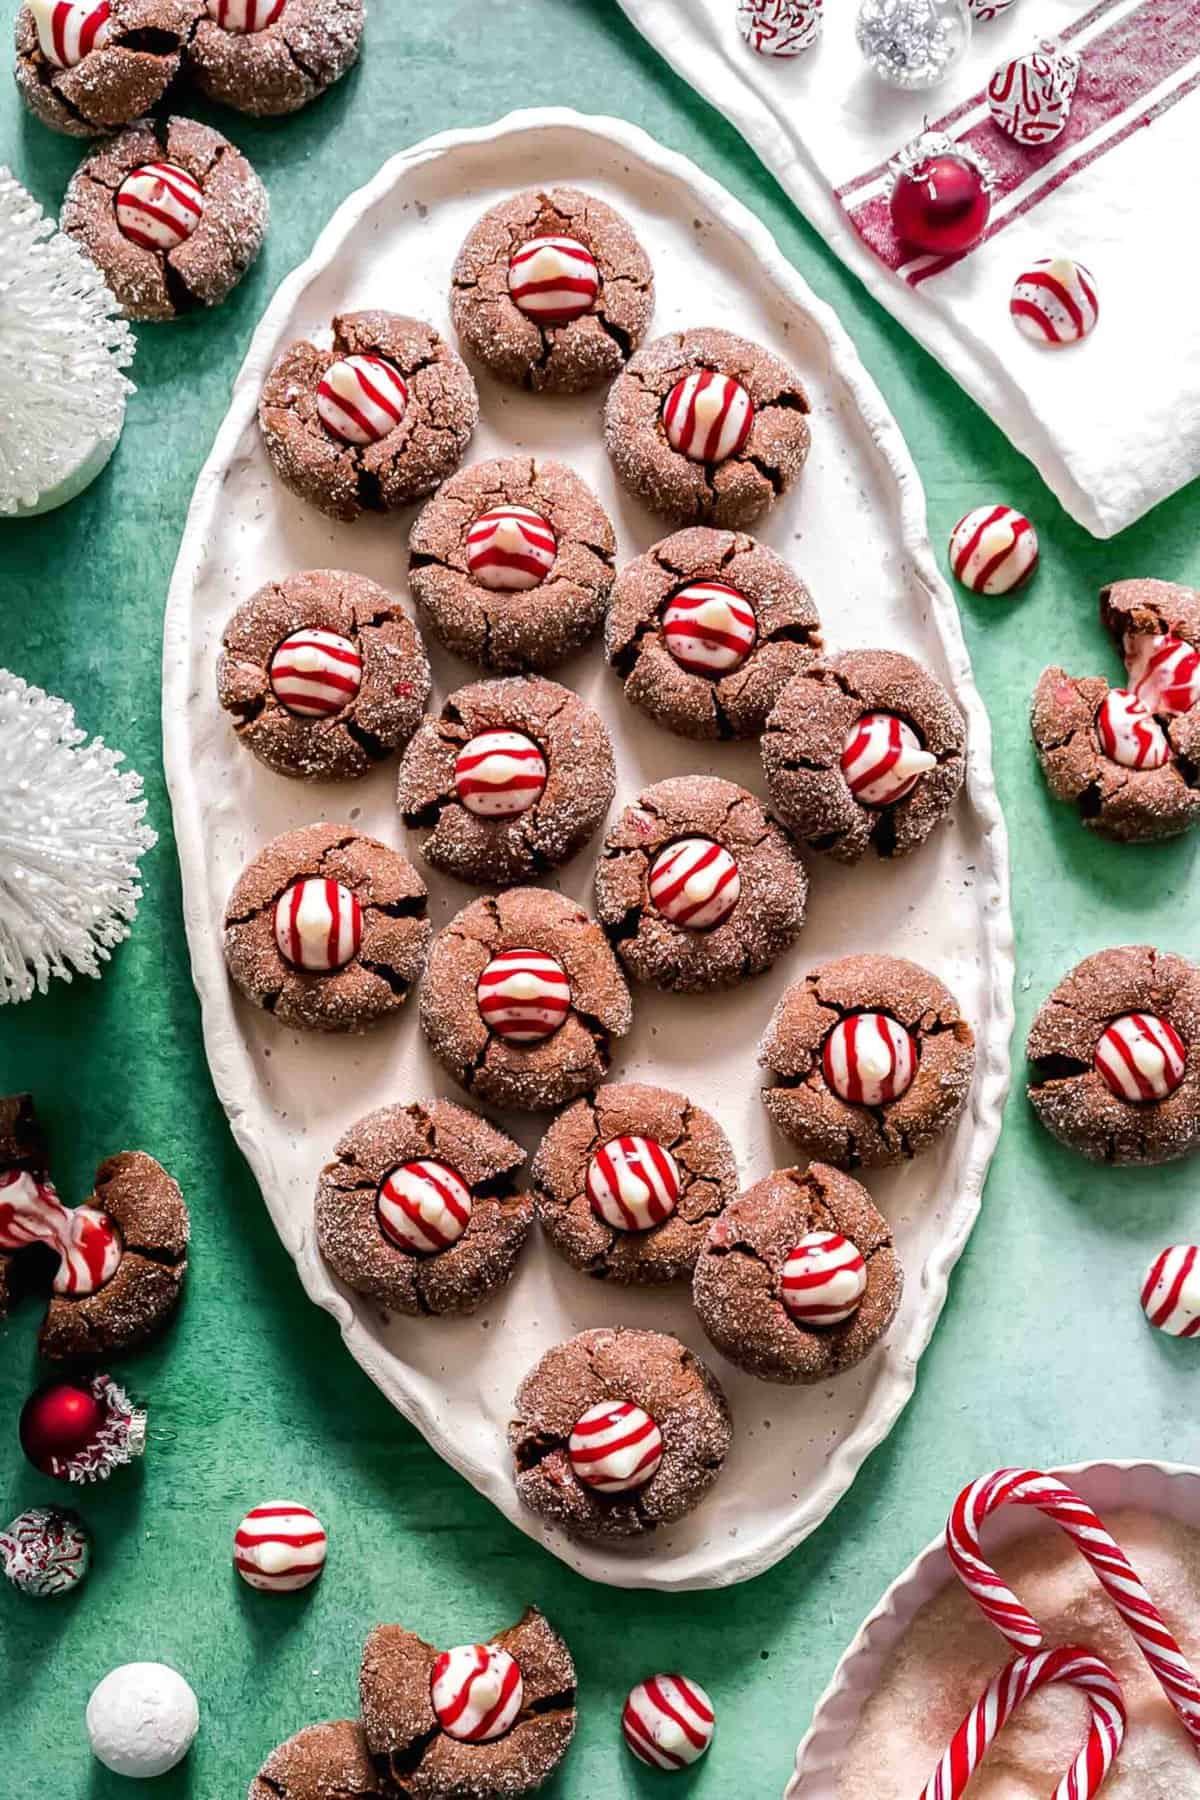 An oval tray filled with chocolate peppermint kiss cookies, surrounded by Hershey's peppermint kisses